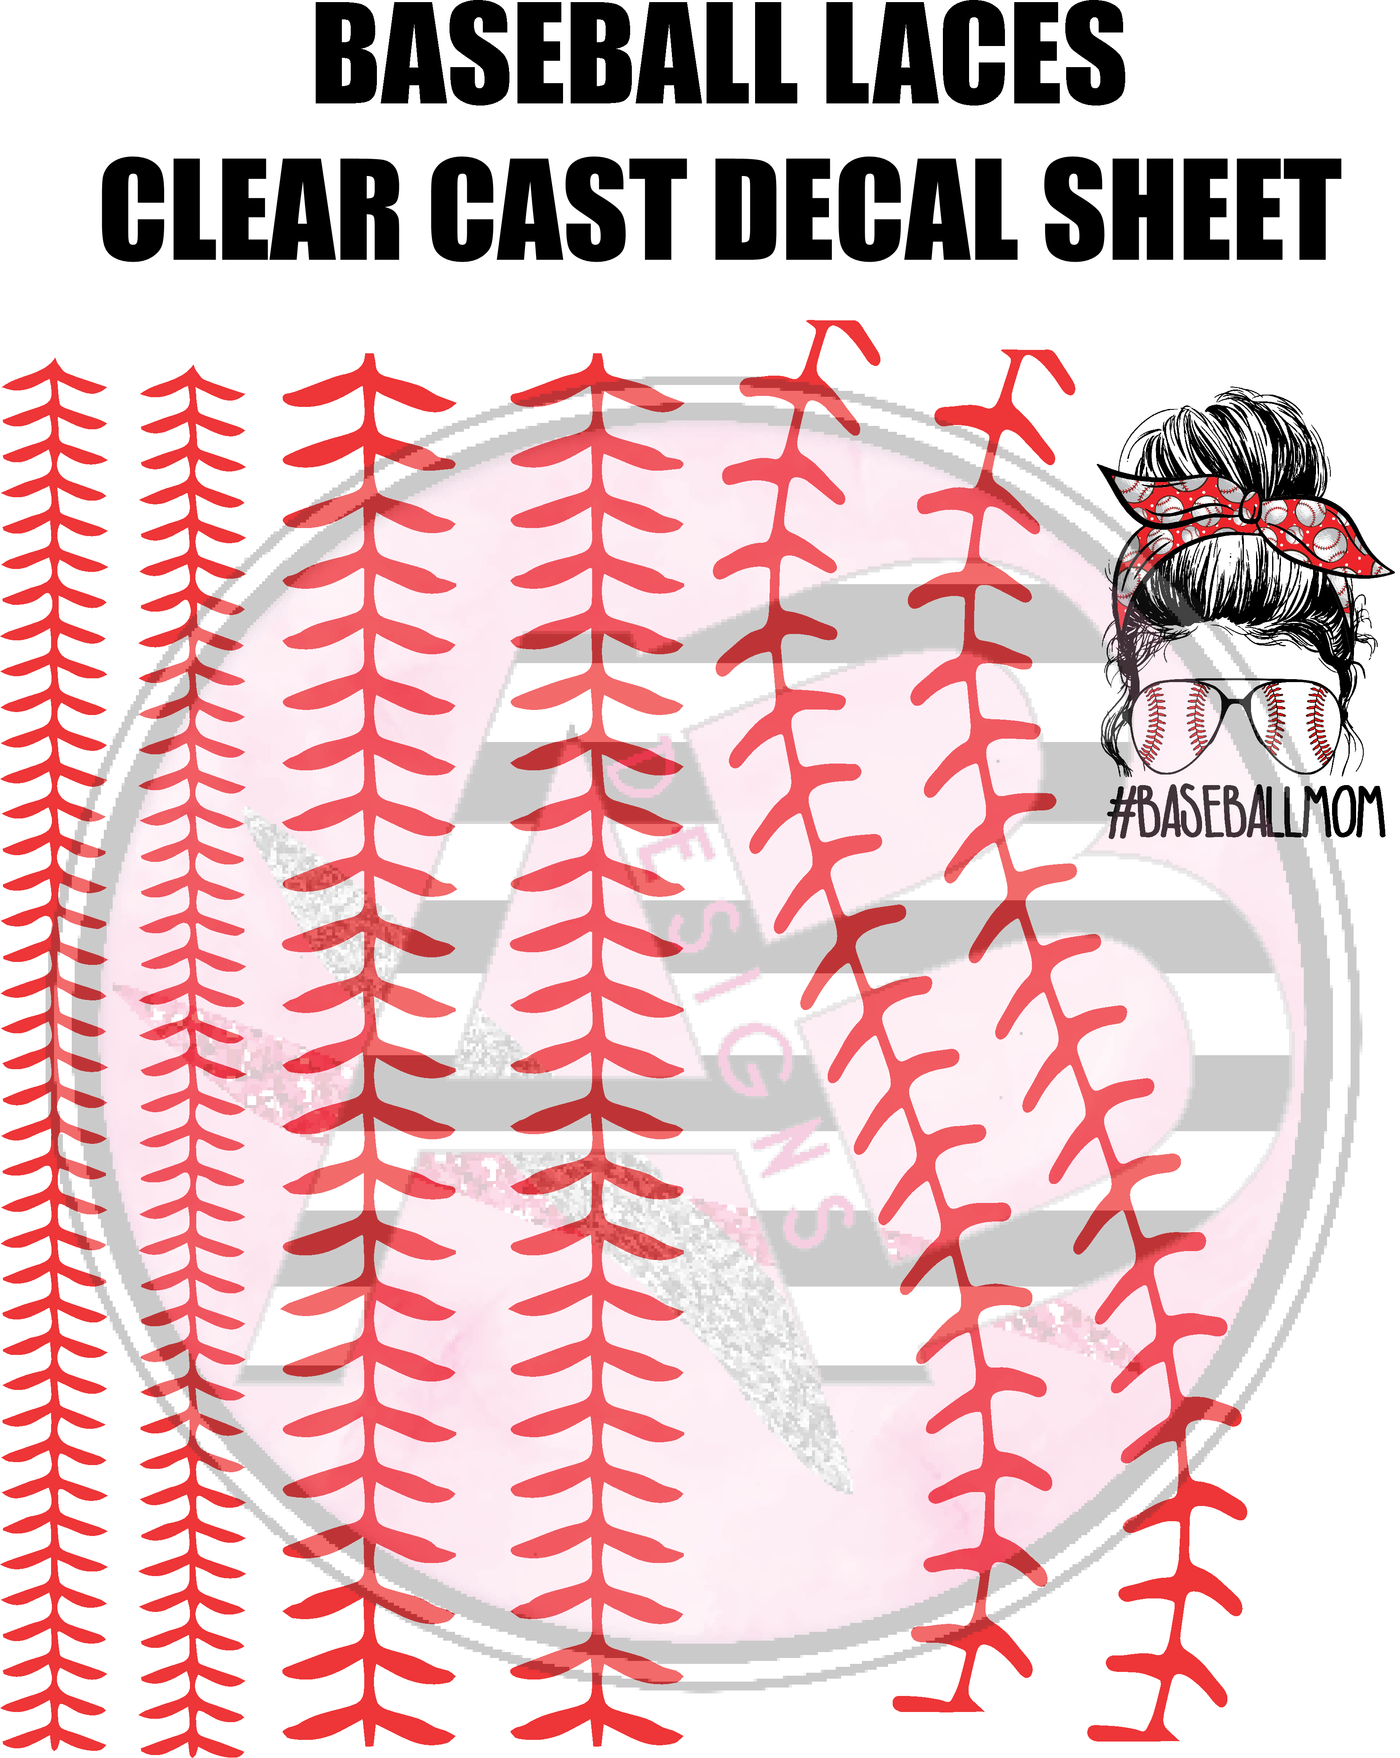 Baseball Laces 01 Full Sheet 12x12 Clear Cast Decal